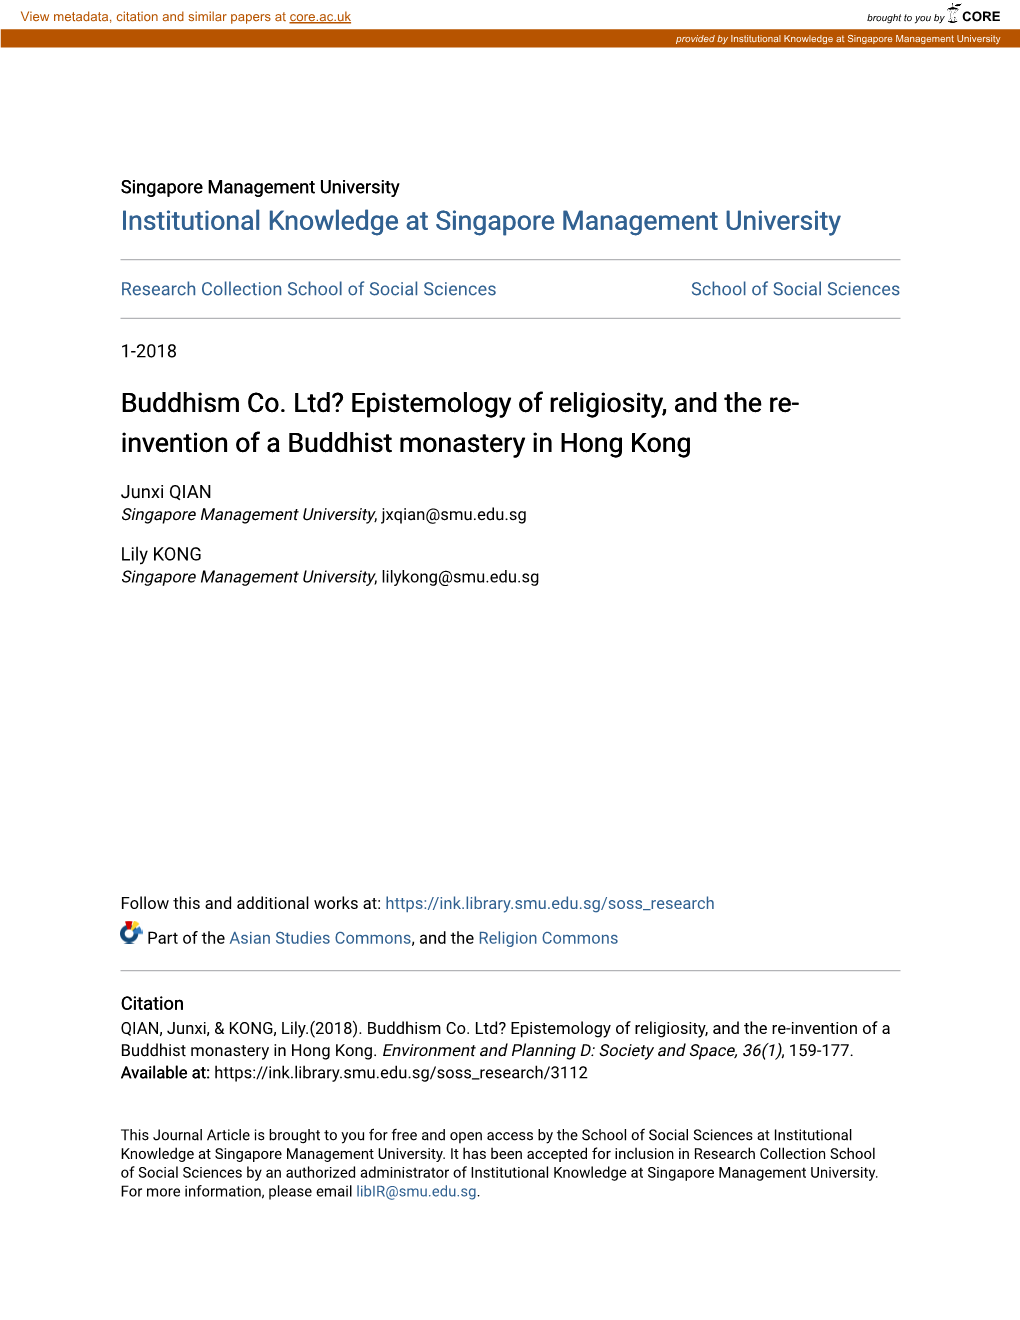 Buddhism Co. Ltd? Epistemology of Religiosity, and the Re-Invention of a Buddhist Monastery in Hong Kong